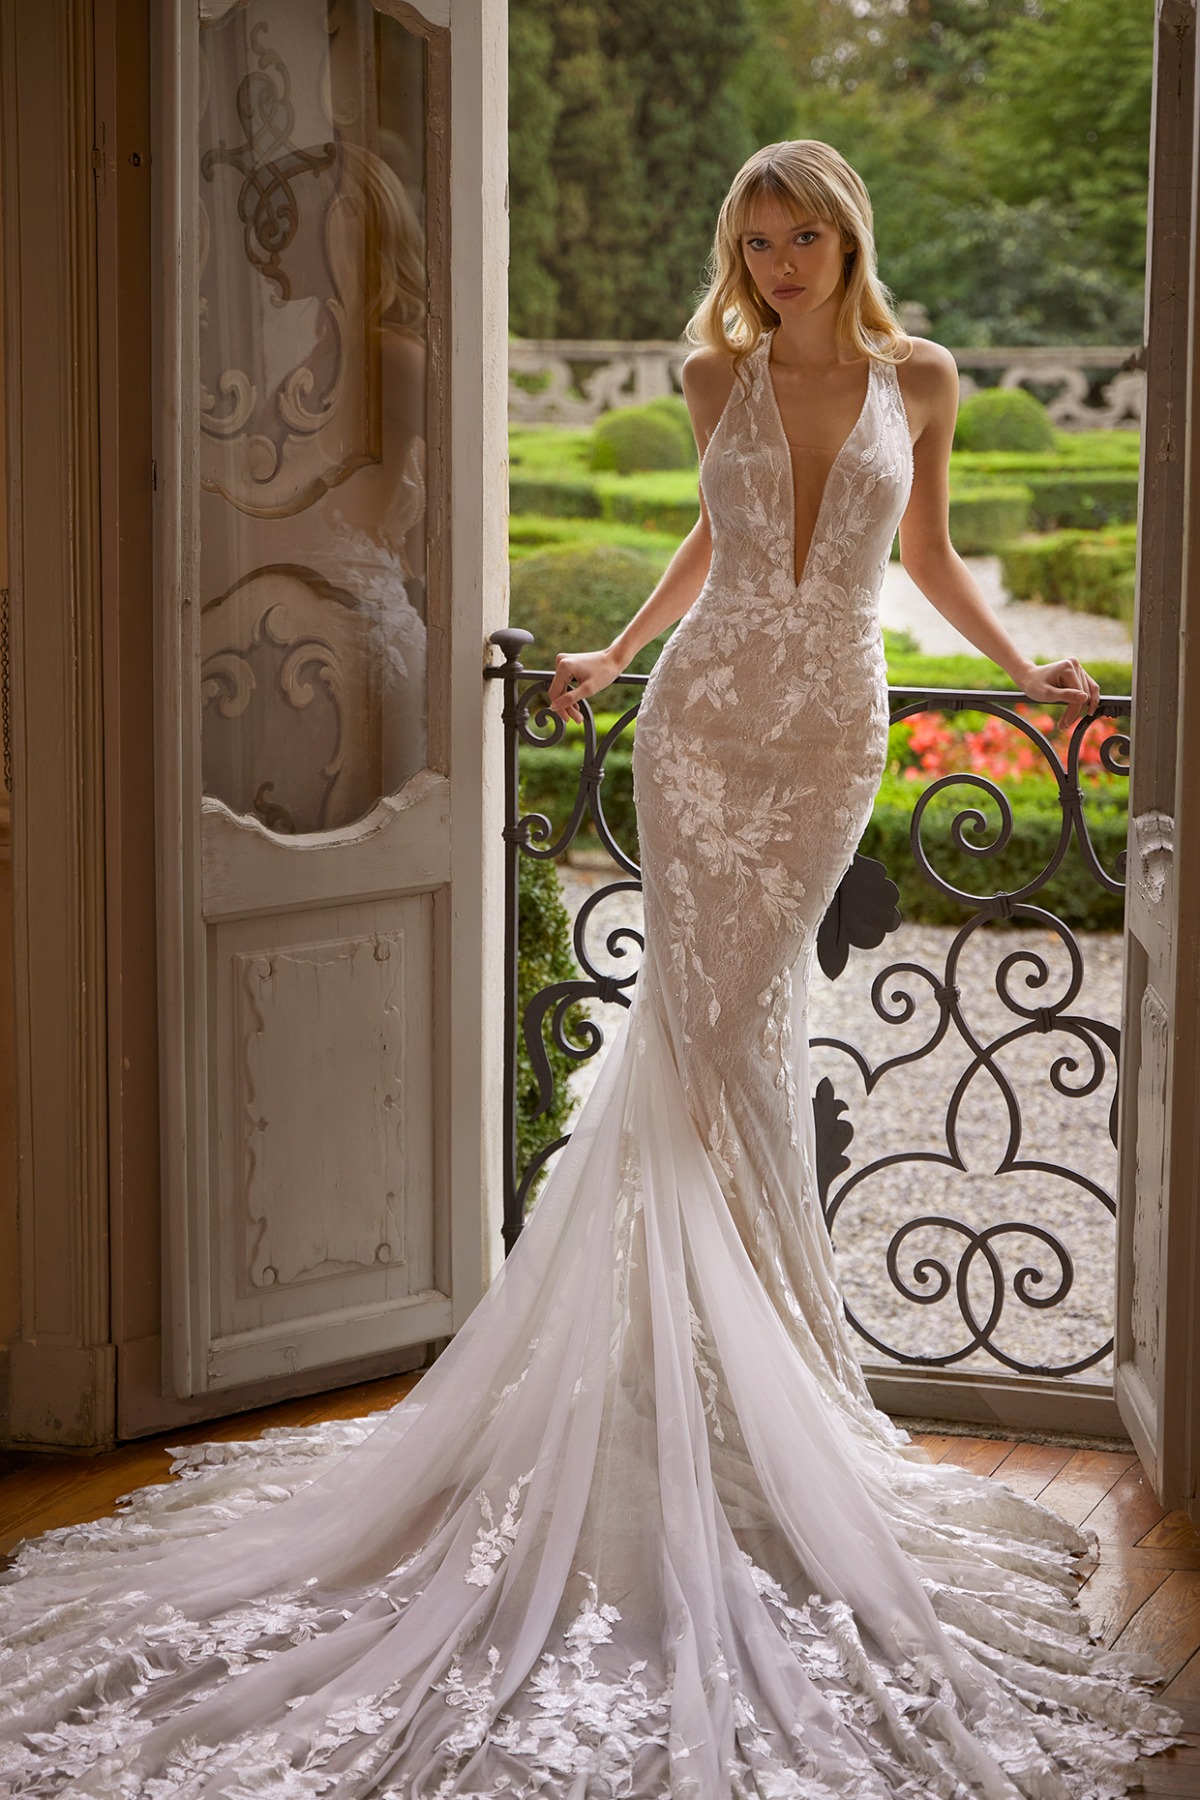 Amethyst Ines Di Santo wedding gown with plunging neckline